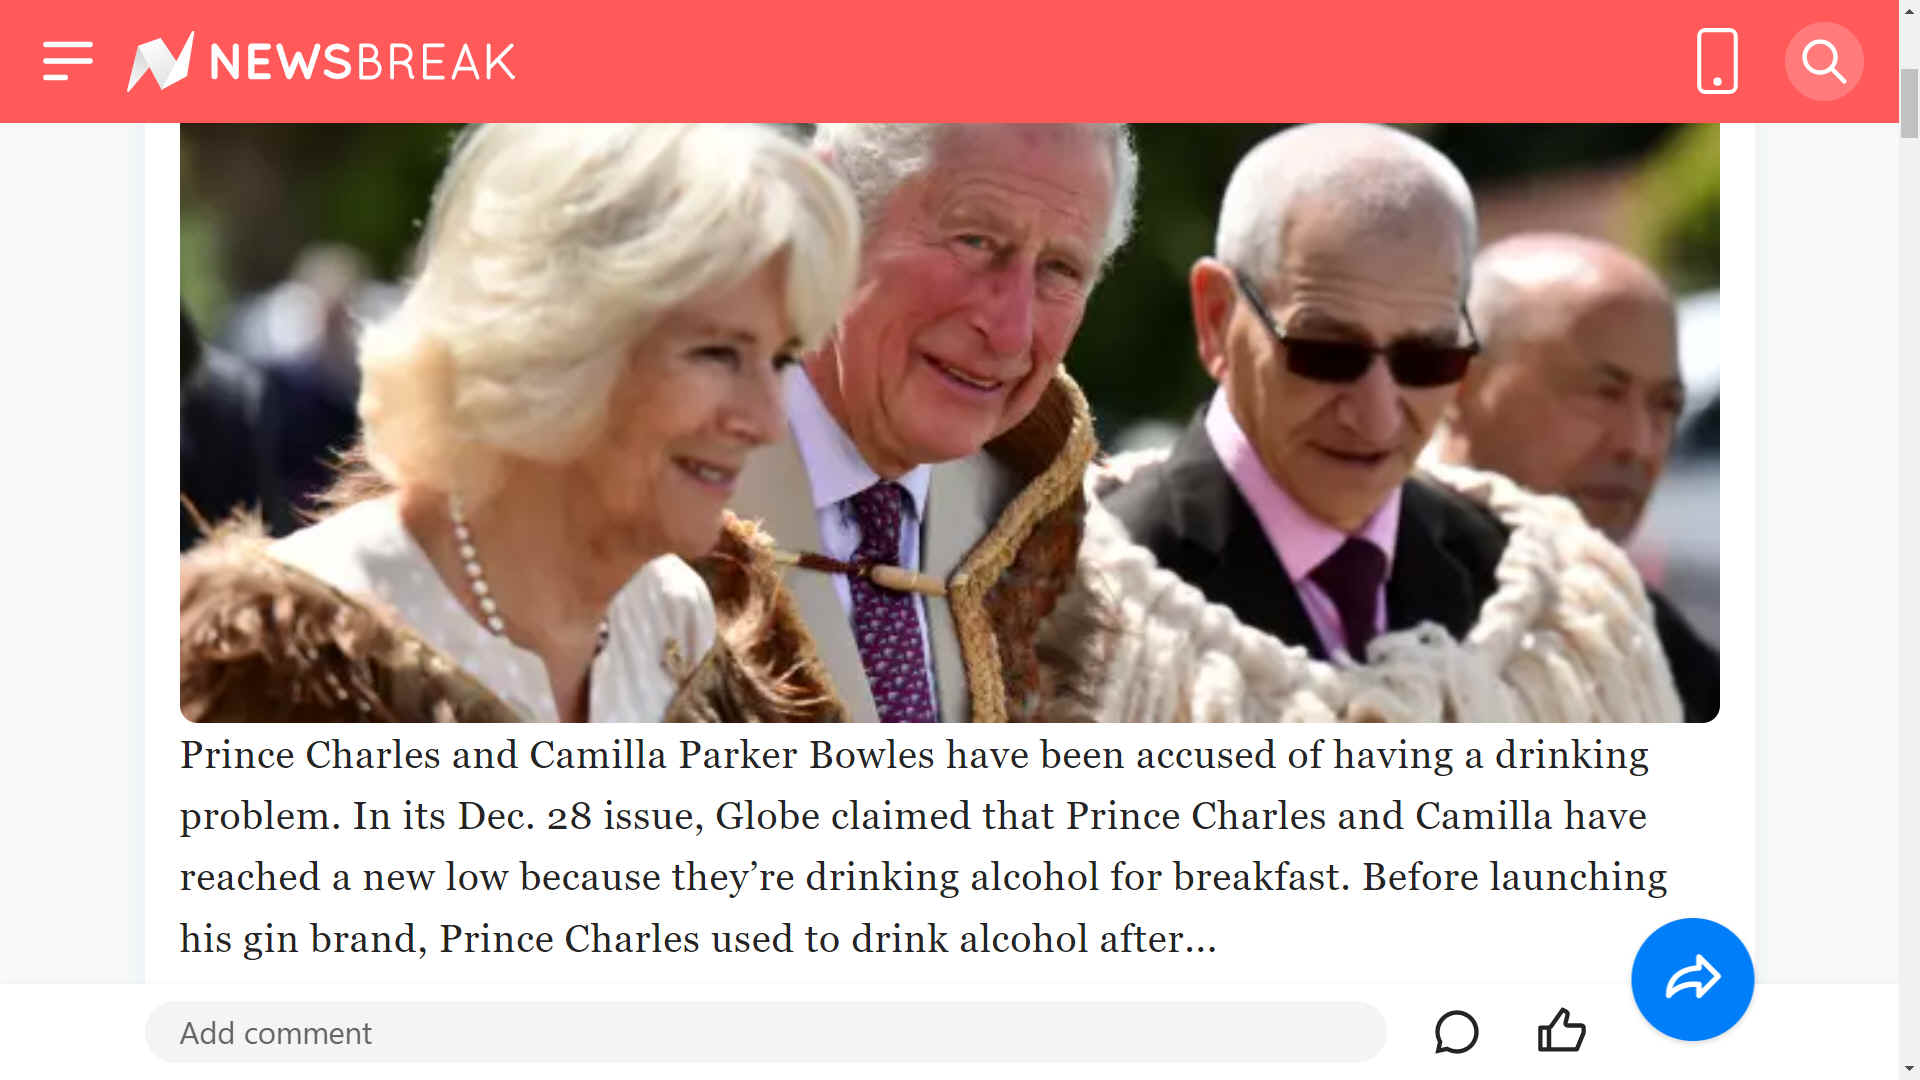 Prince Charles and Camilla have been accused of having an alcohol drinking problem